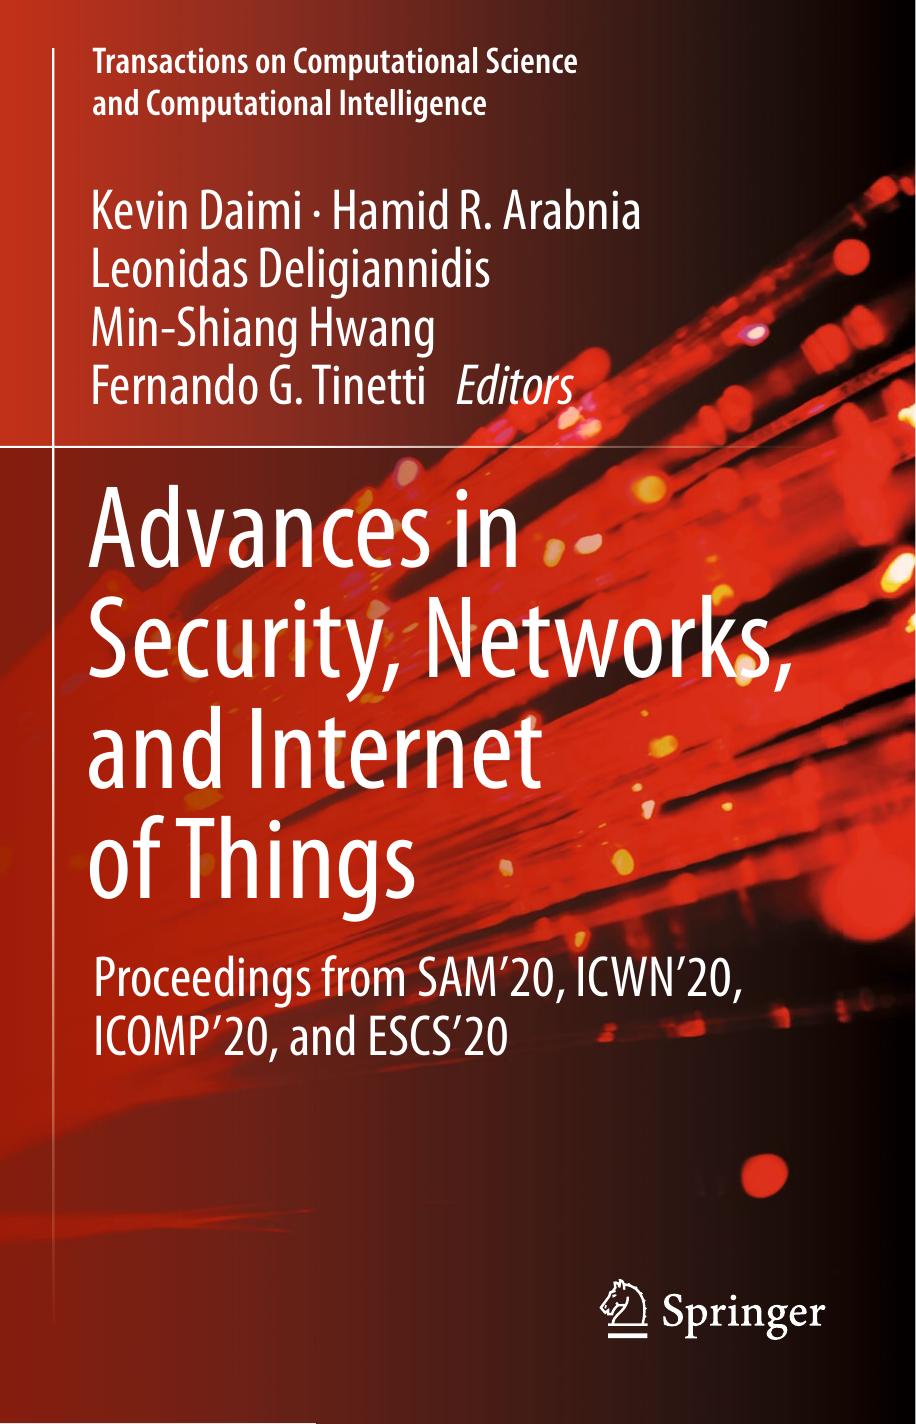 Advances in Security, Networks, and Internet of Things: Proceedings From SAM'20, ICWN'20, ICOMP'20, and ESCS'20